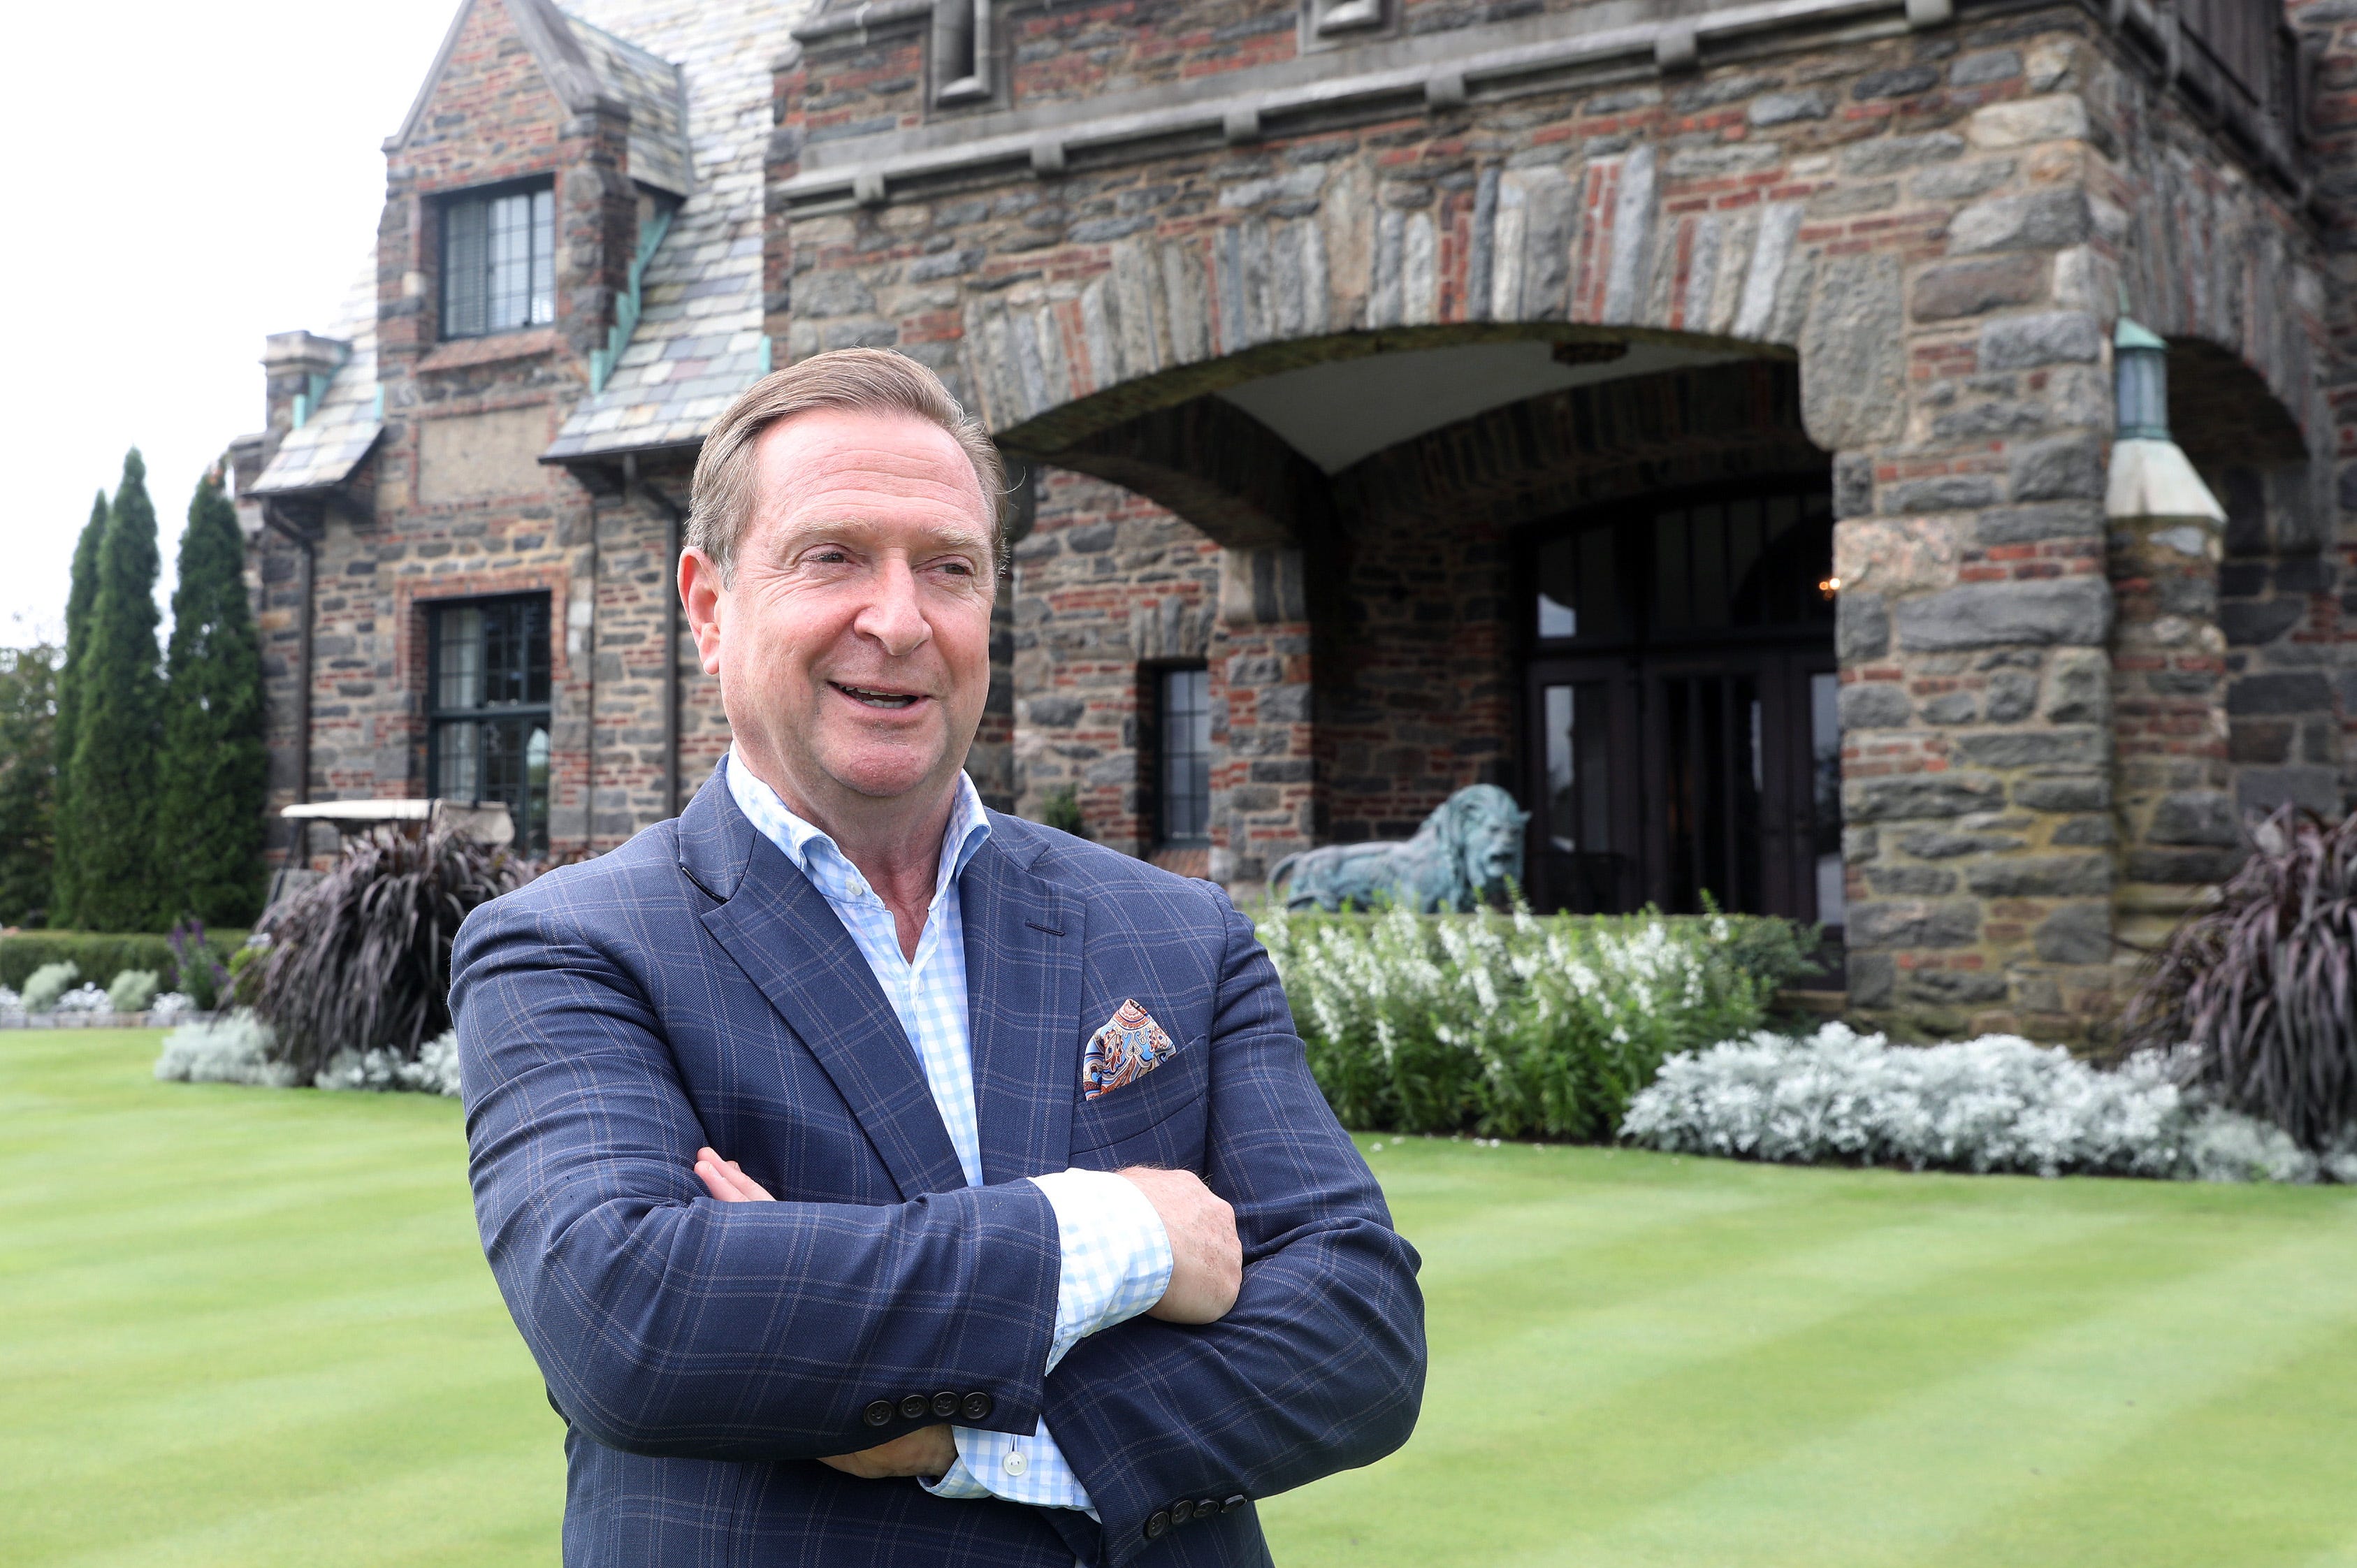 lohud.com - Mike Dougherty - Golf: Colin Burns leaves Winged Foot to help set a new standard at The Apogee Club